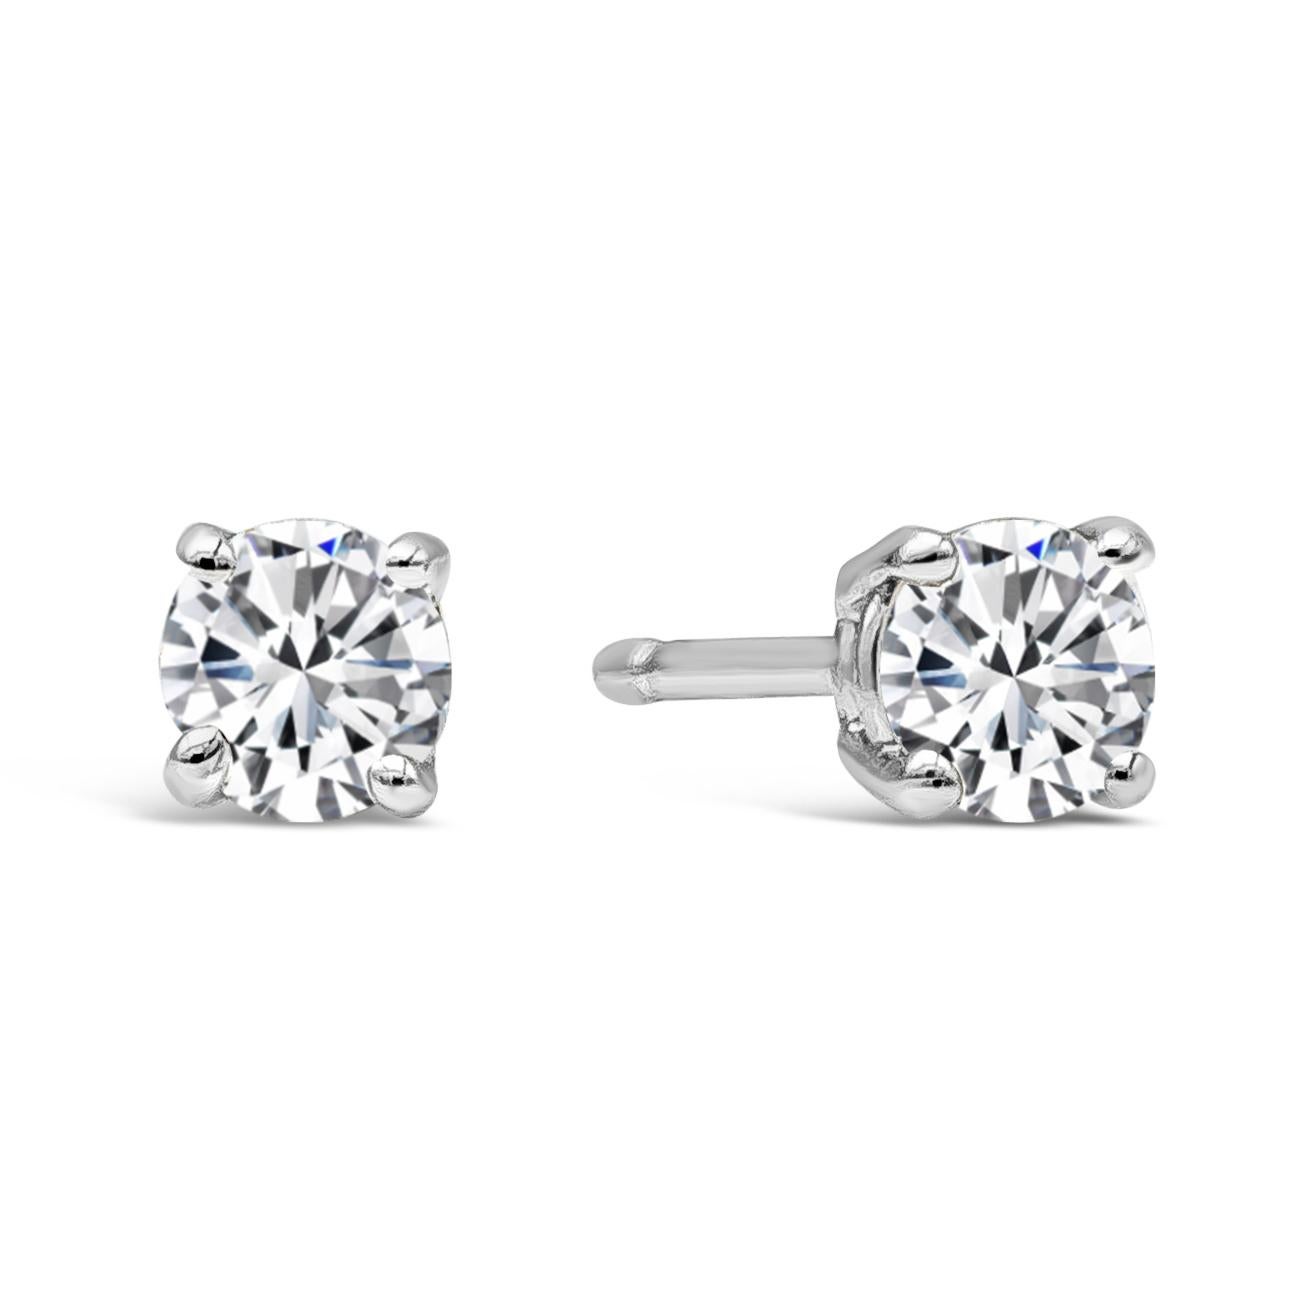 Two perfectly matched timeless stud earring set into a refined four prong mounting with standard friction backs to match any style. Perennial stud earrings showcasing 0.30 carat round brilliant diamonds. Color is G and Clarity is SI. Flawlessly made